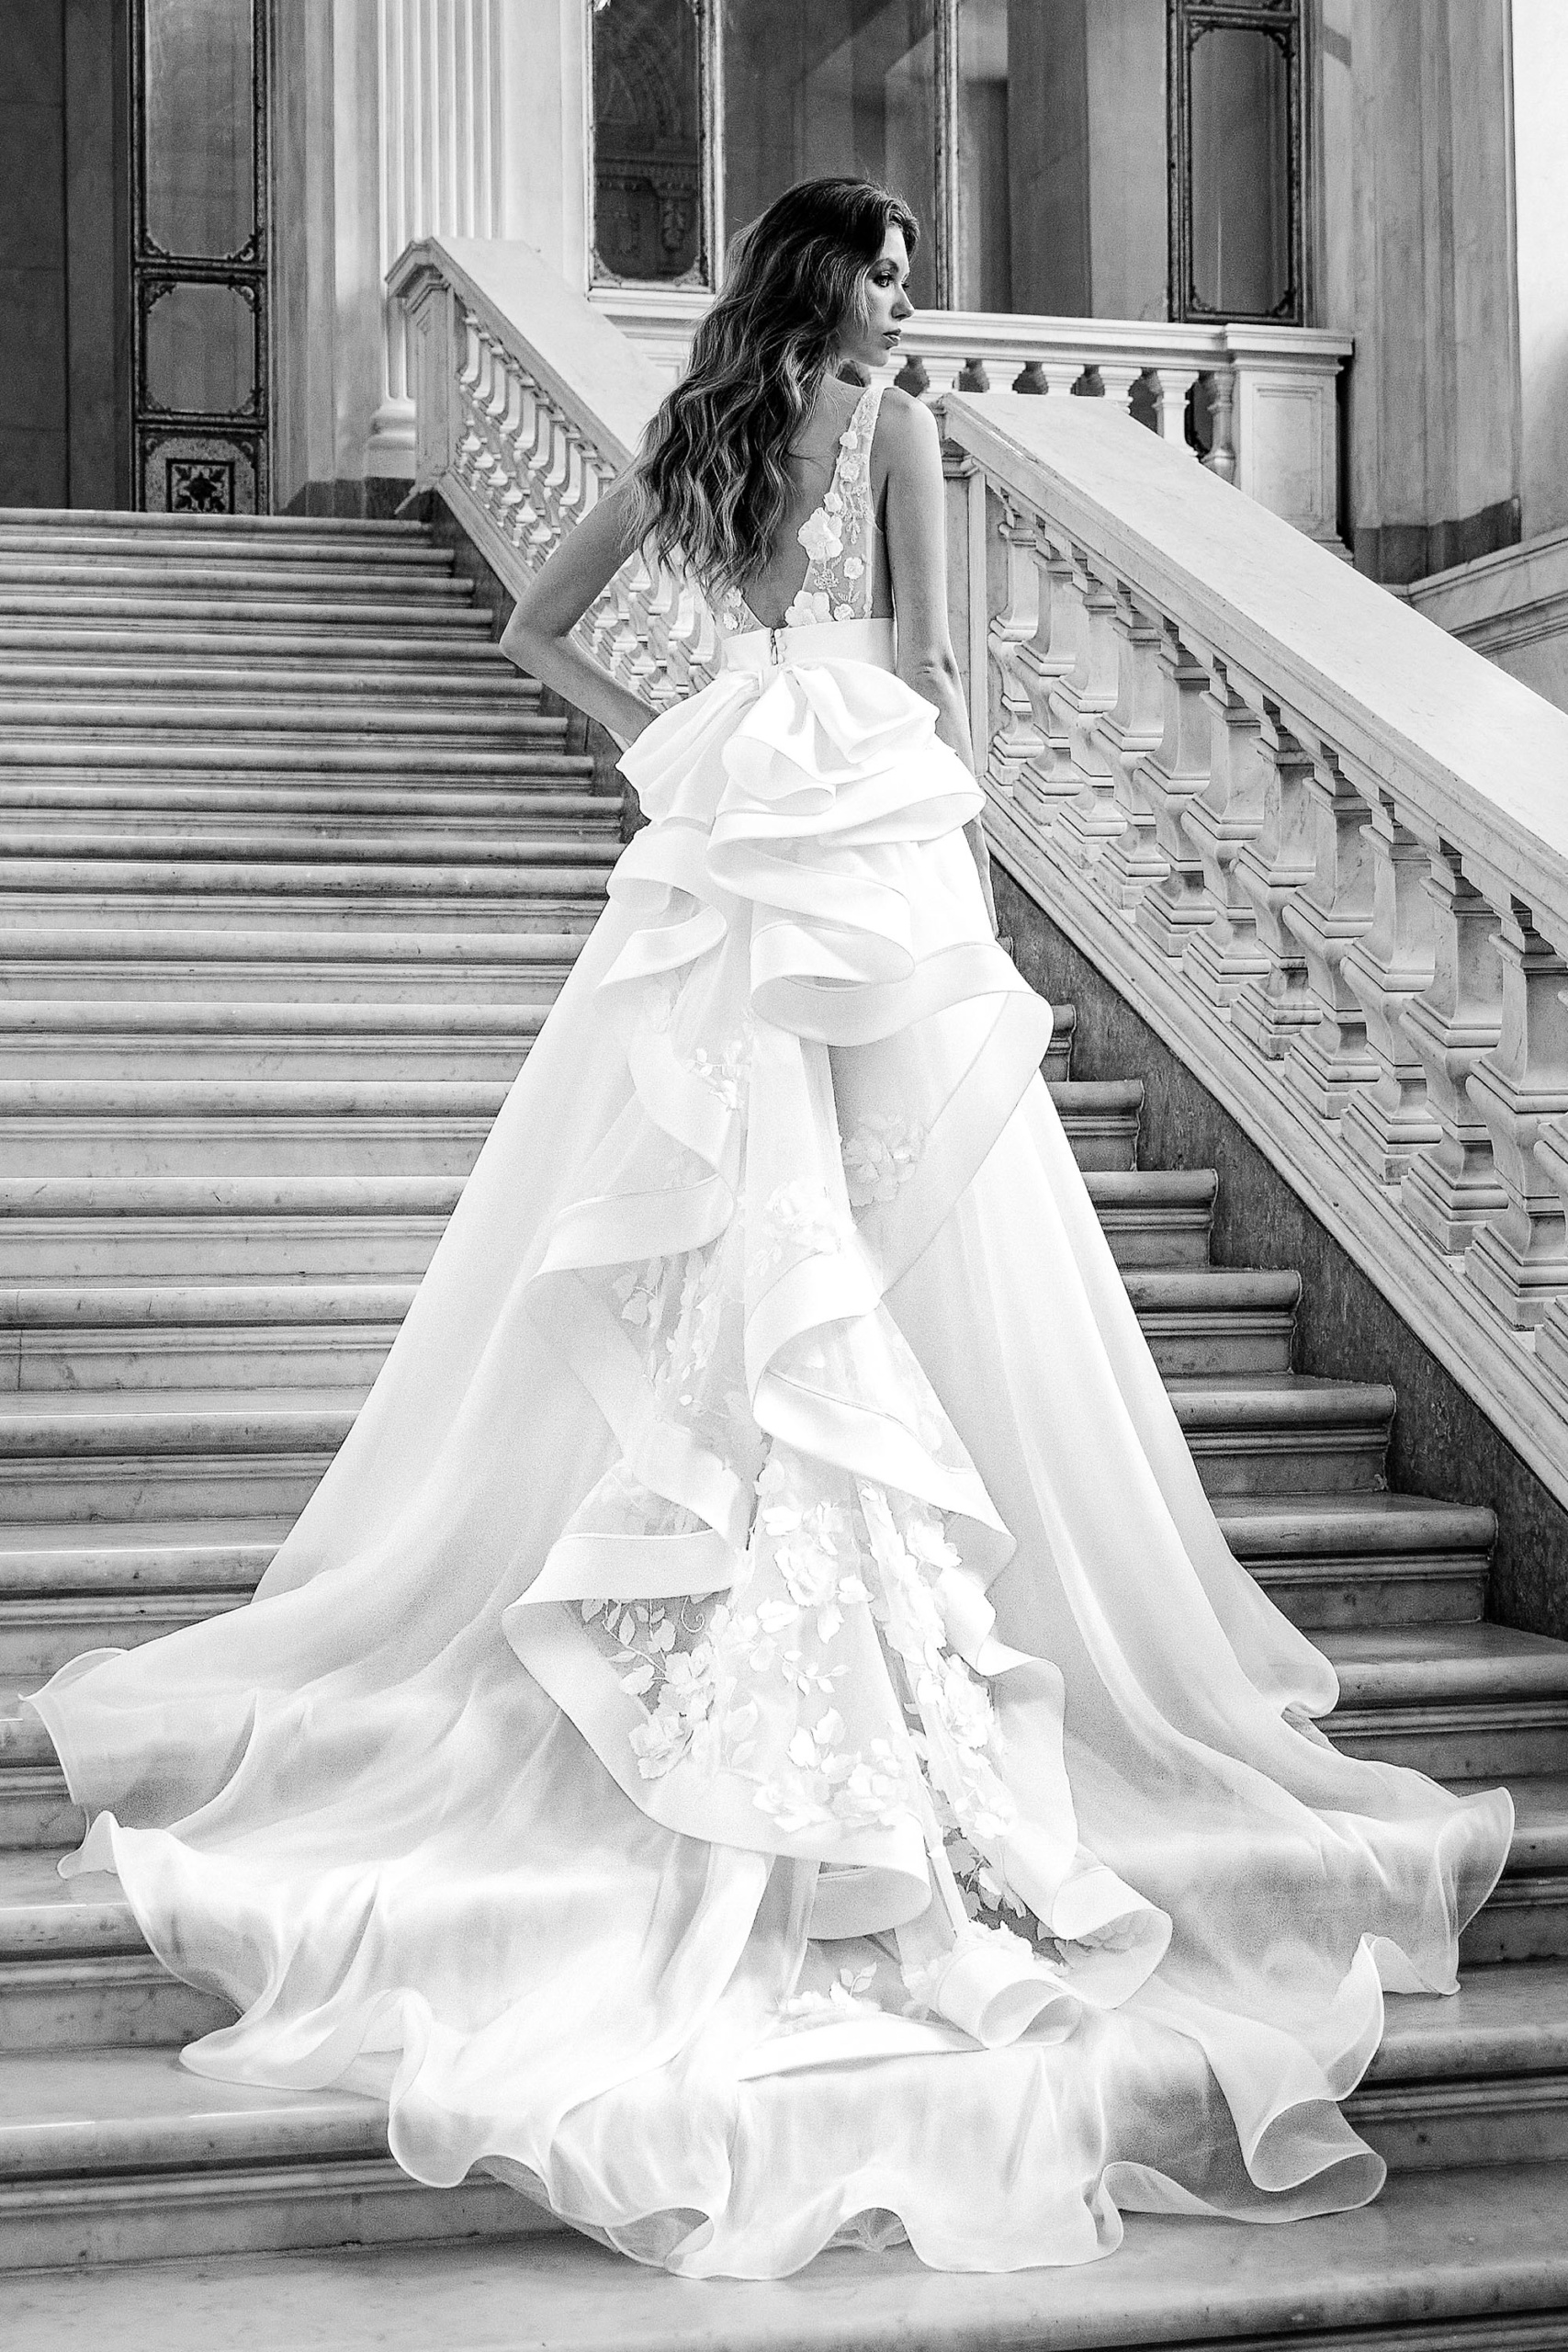 Wedding Dresses Modena: Discover Bridal Masterpieces Redefining Nouveau Chic - Wear Haute Couture at Your Wedding